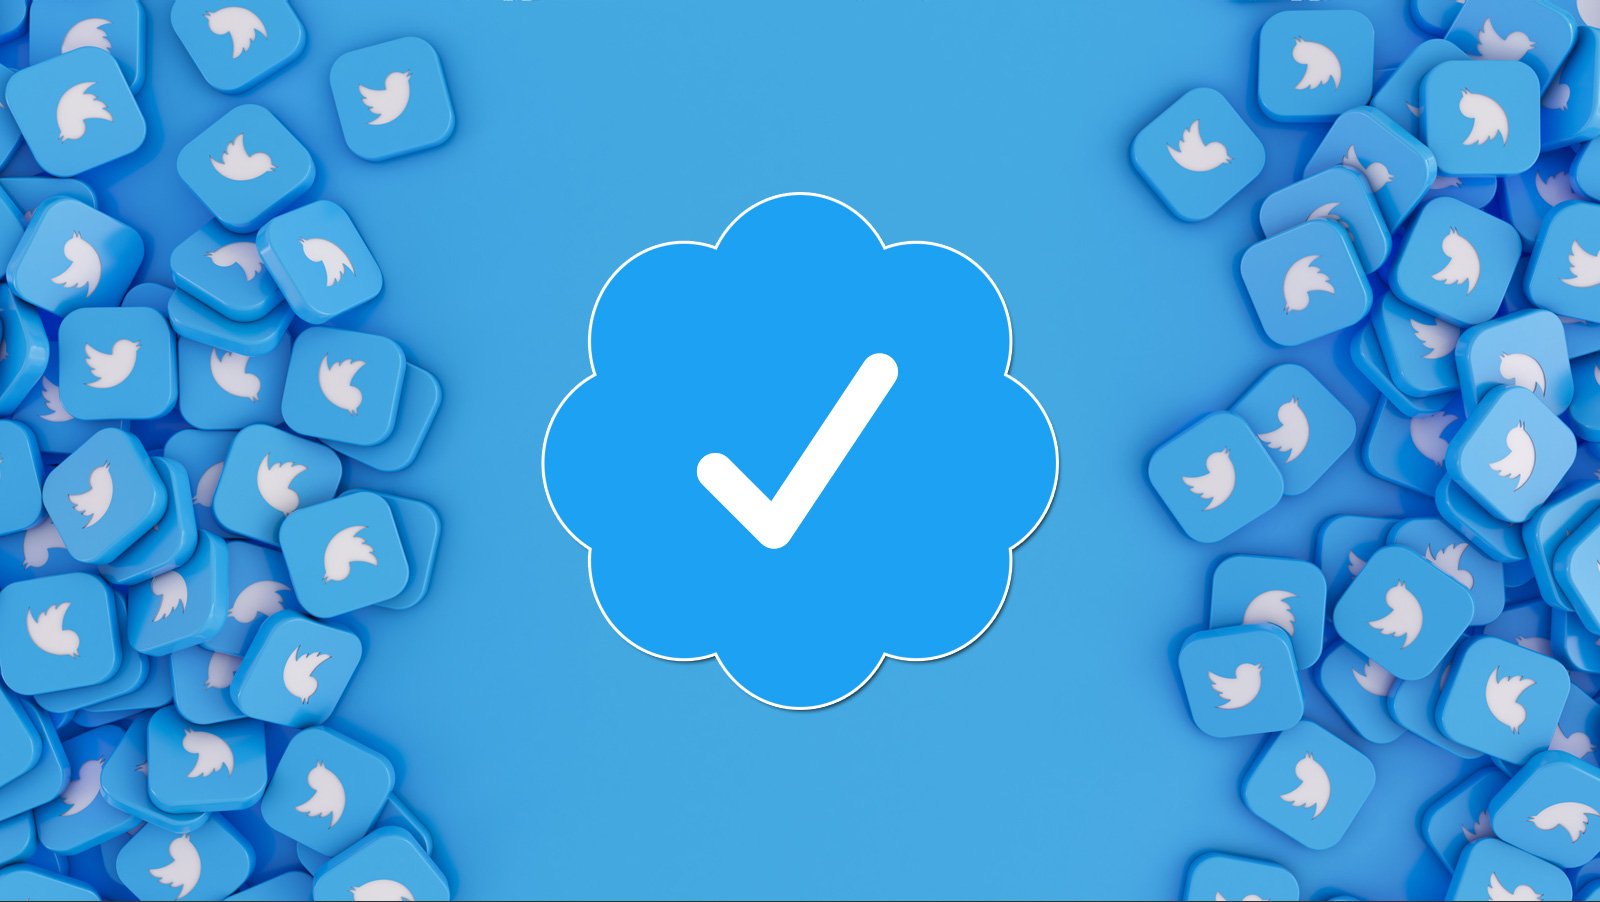 Twitter badges with a centered verified logo